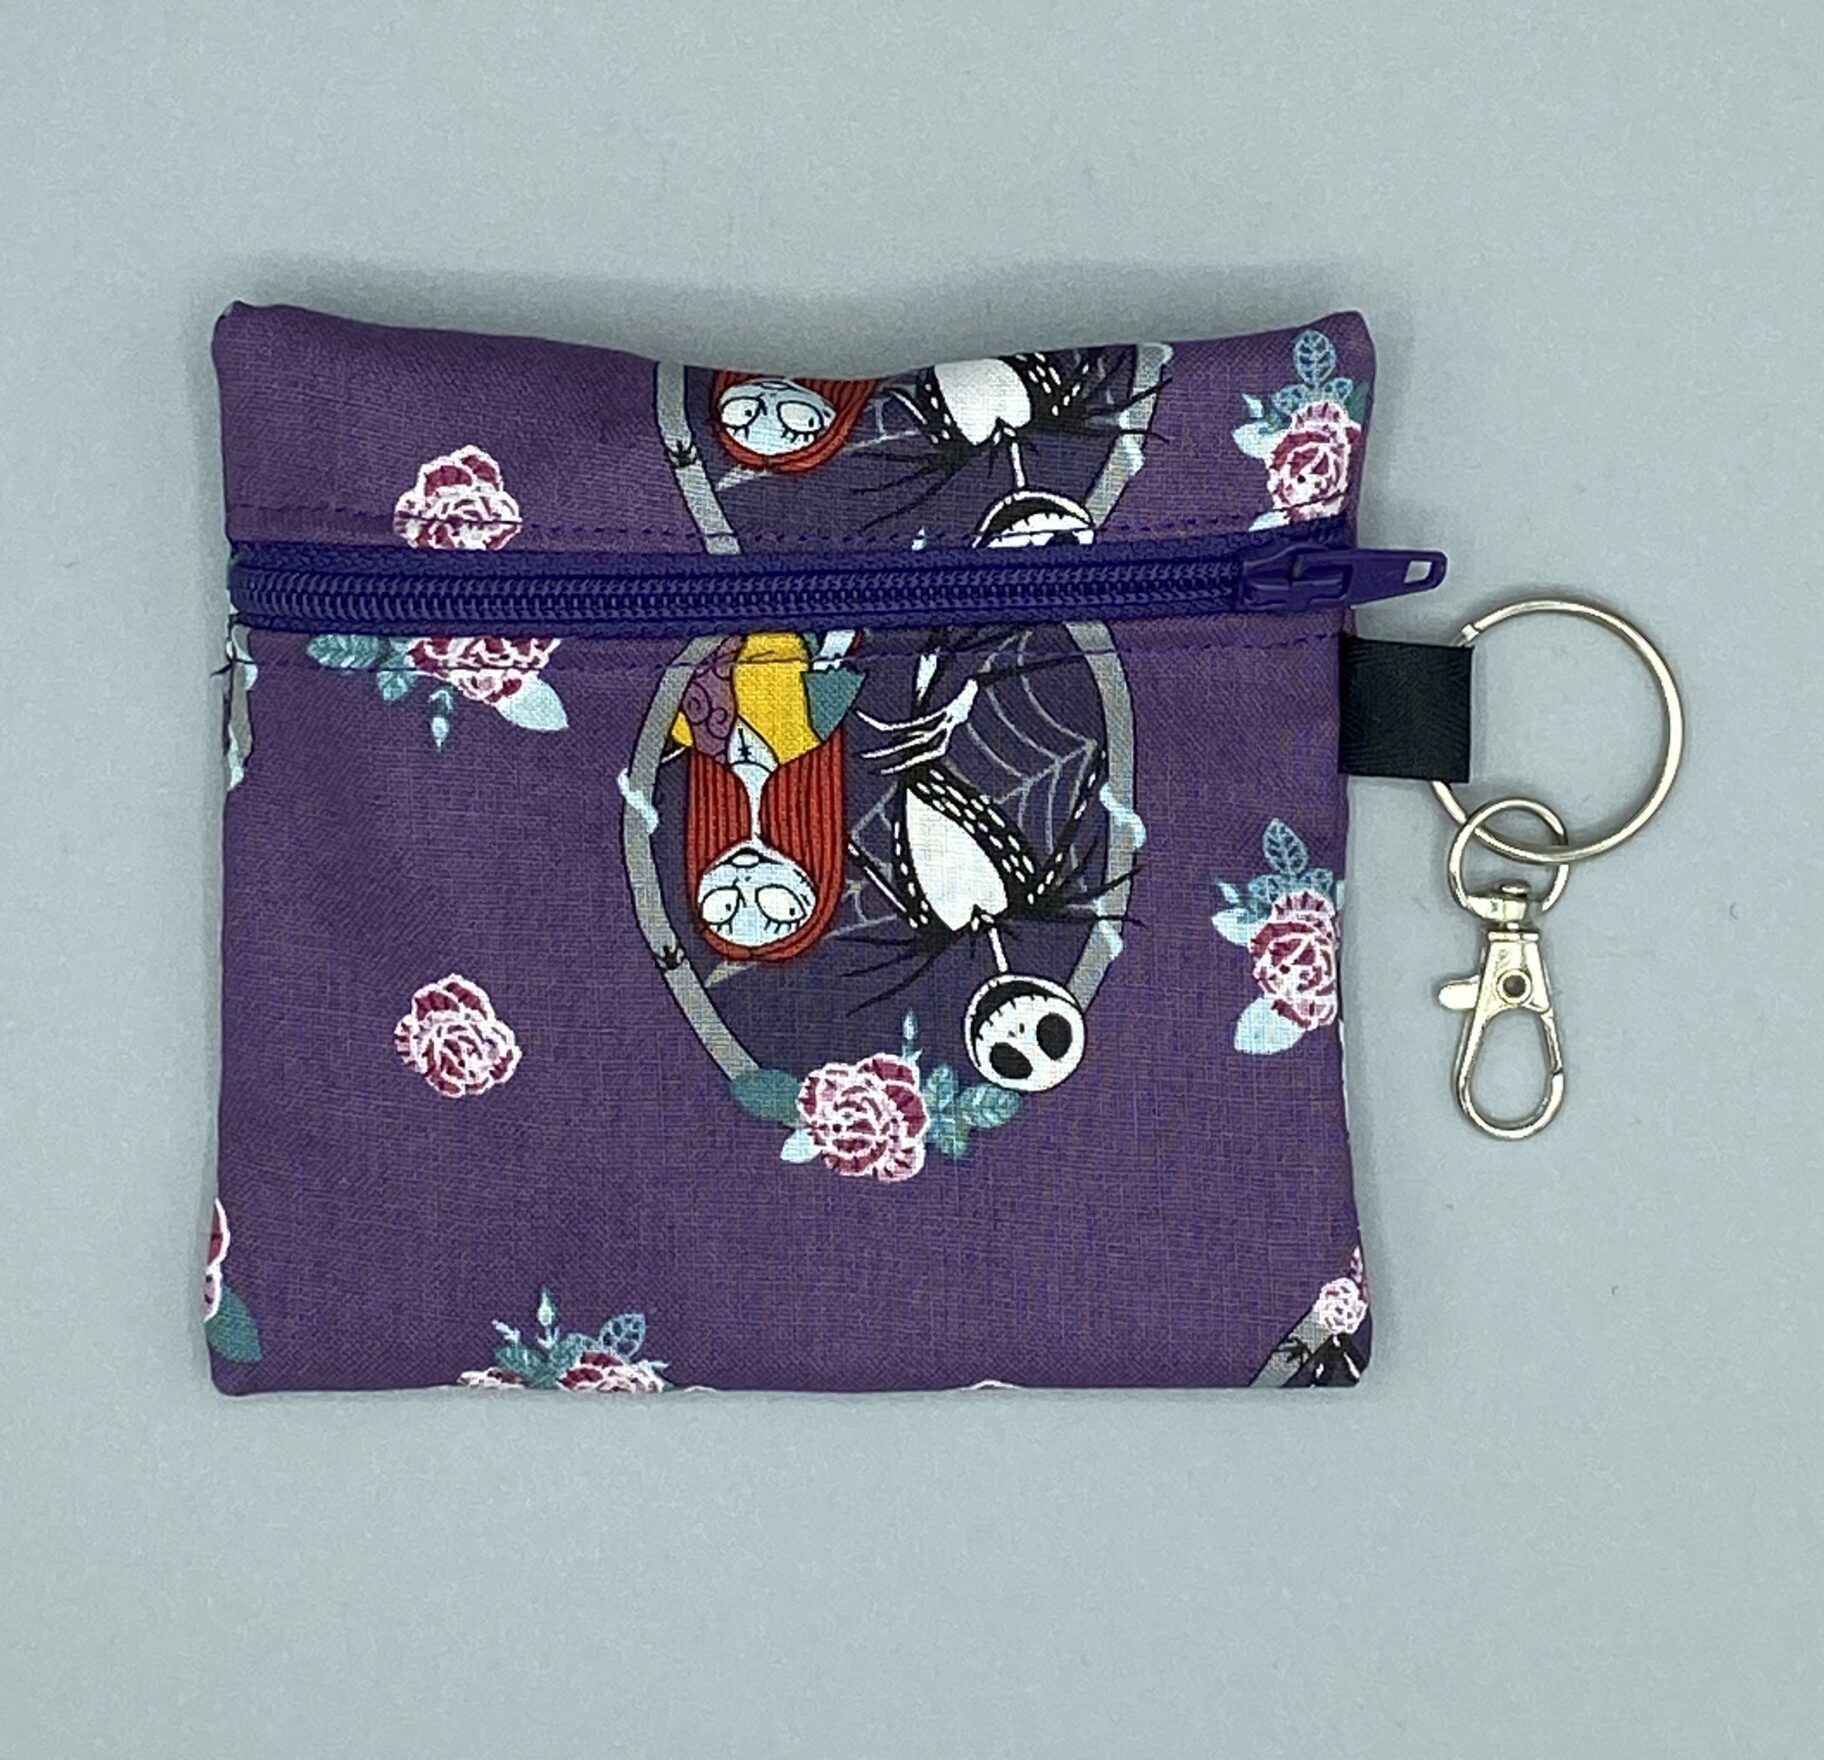 Double Pocket Zippered Coin Purse - It's So Corinney